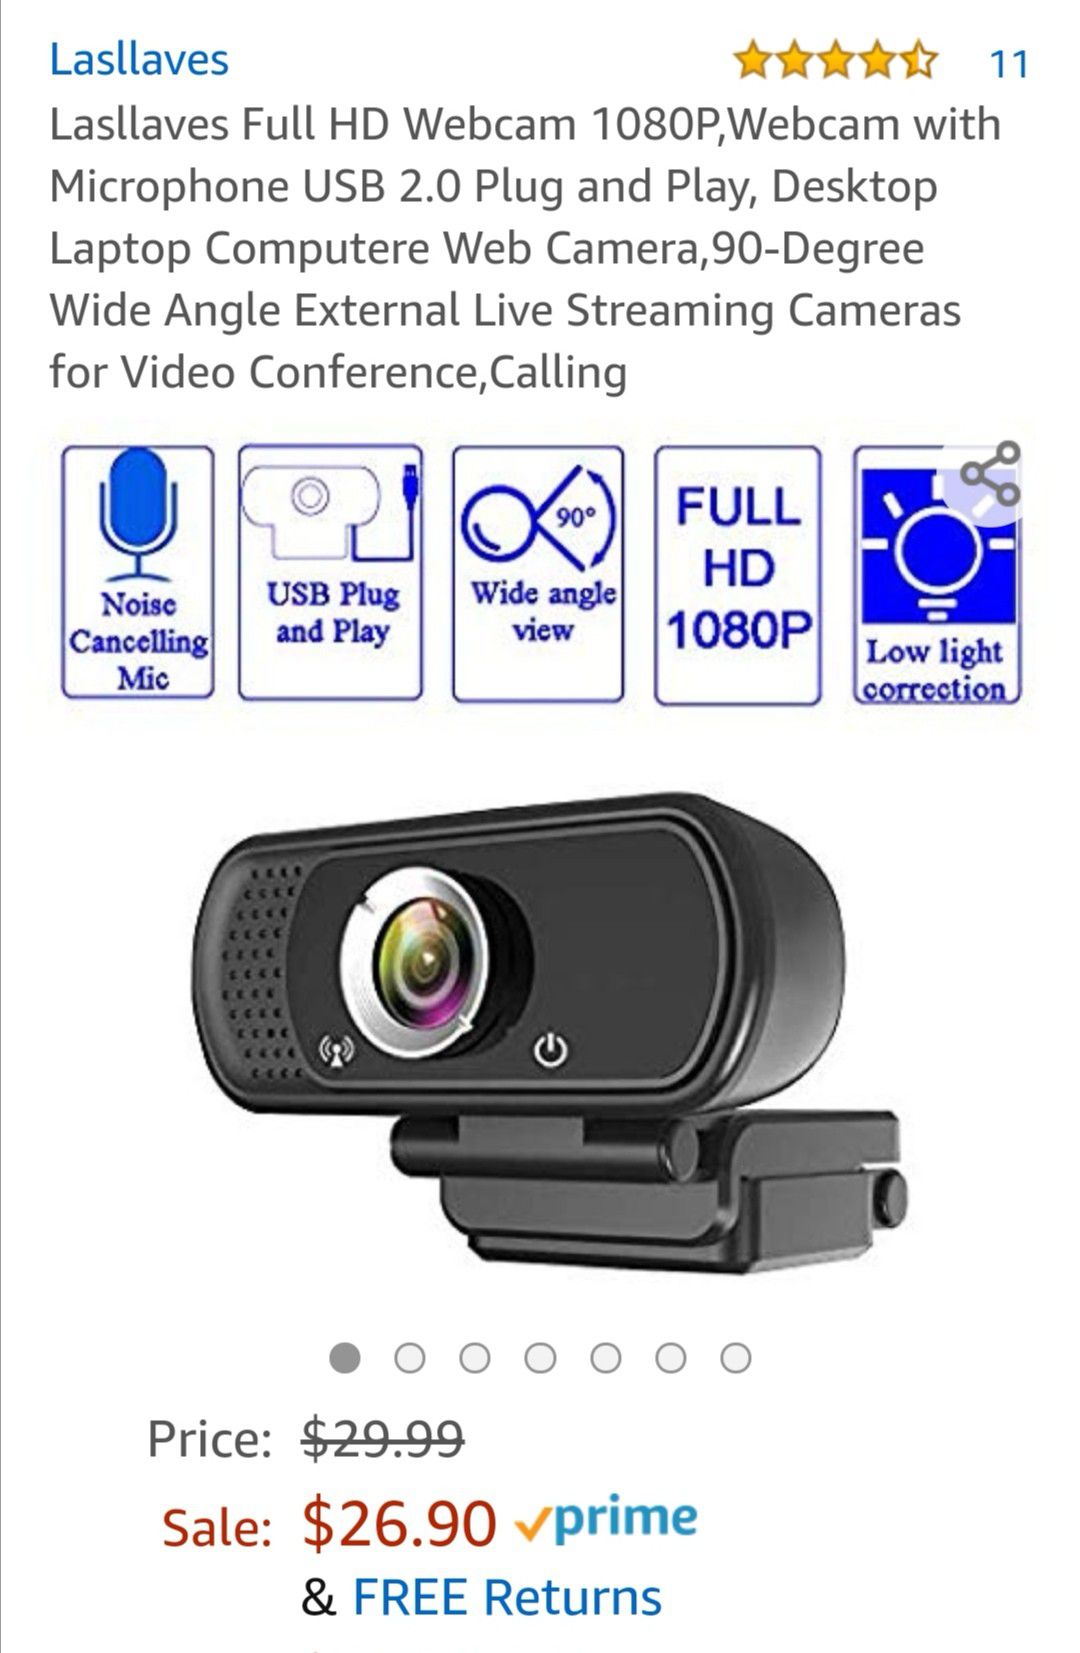 Lasllaves Full HD Webcam 1080P,Webcam with Microphone USB 2.0 Plug and Play,